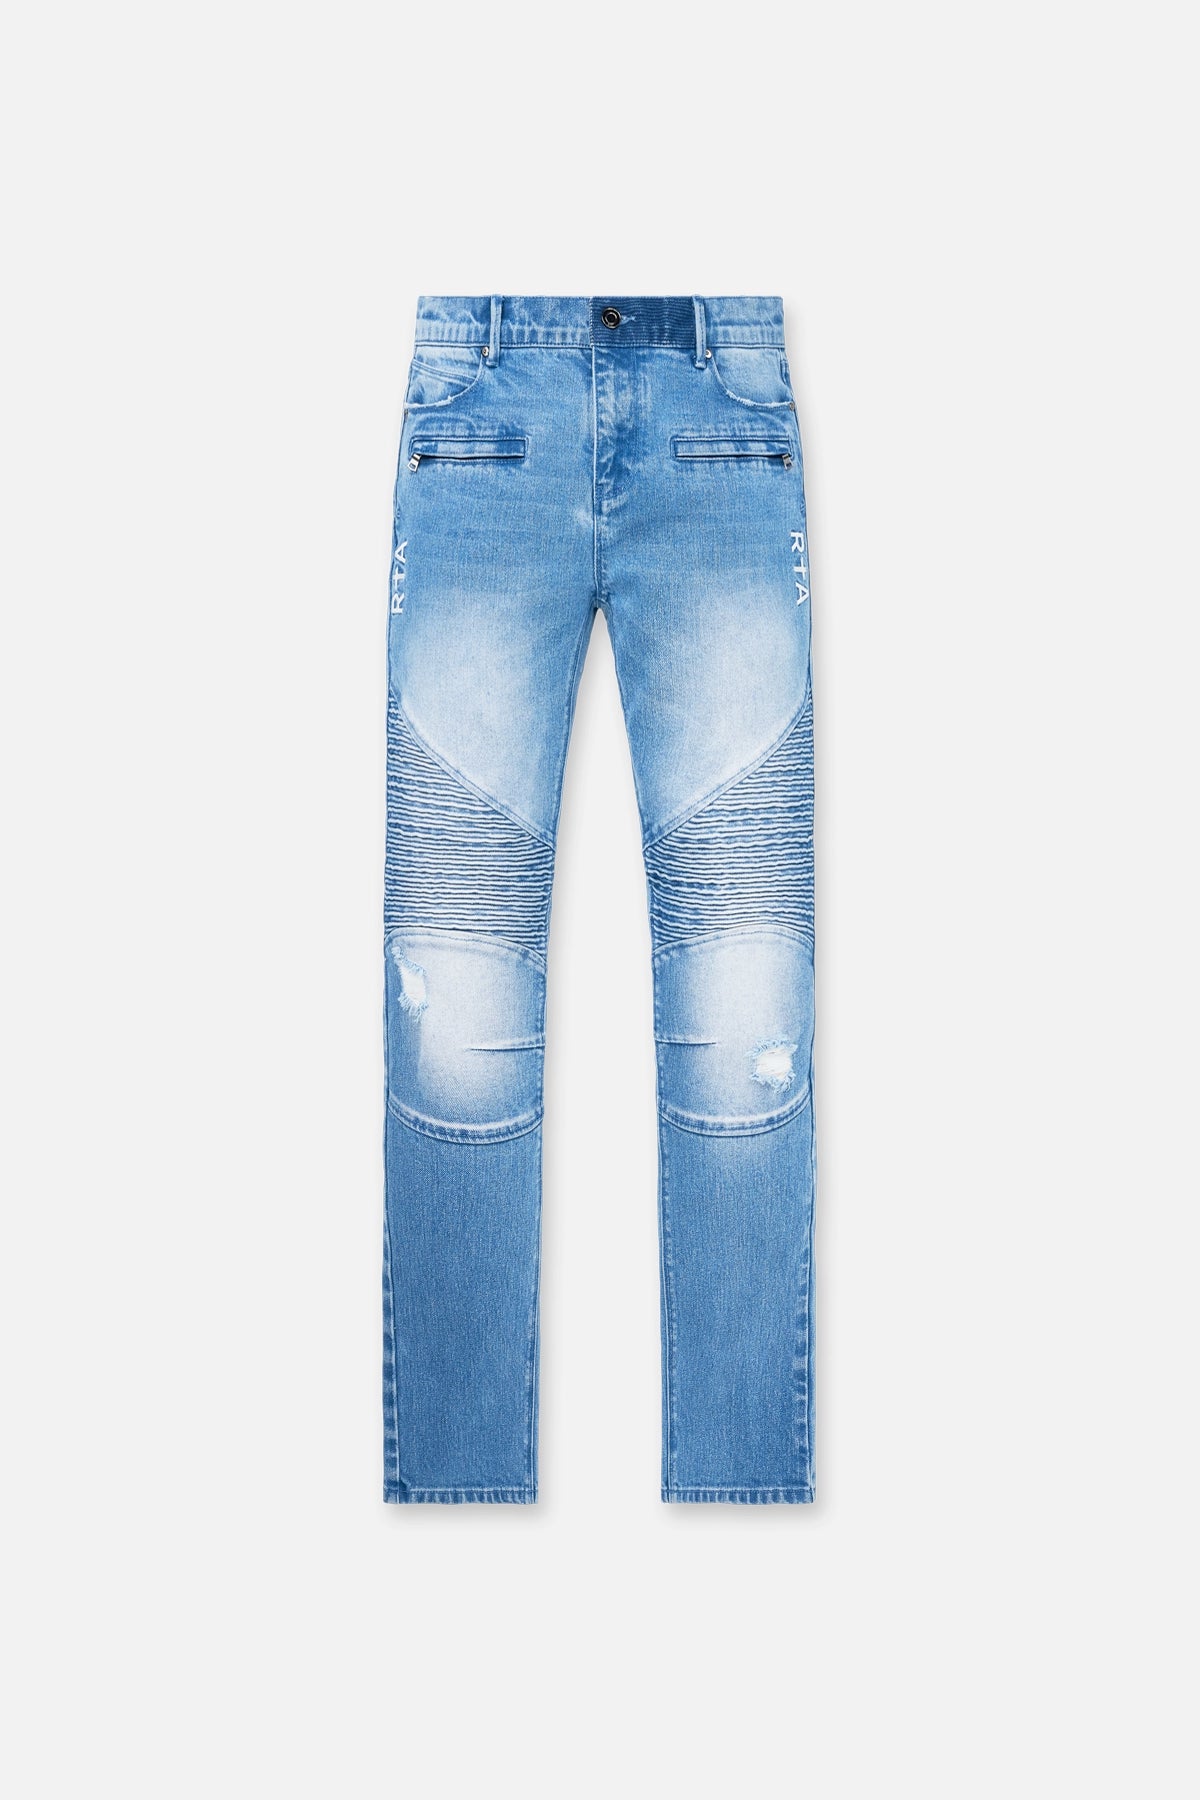 RTA jeans for men arrive in a wide selection of styles